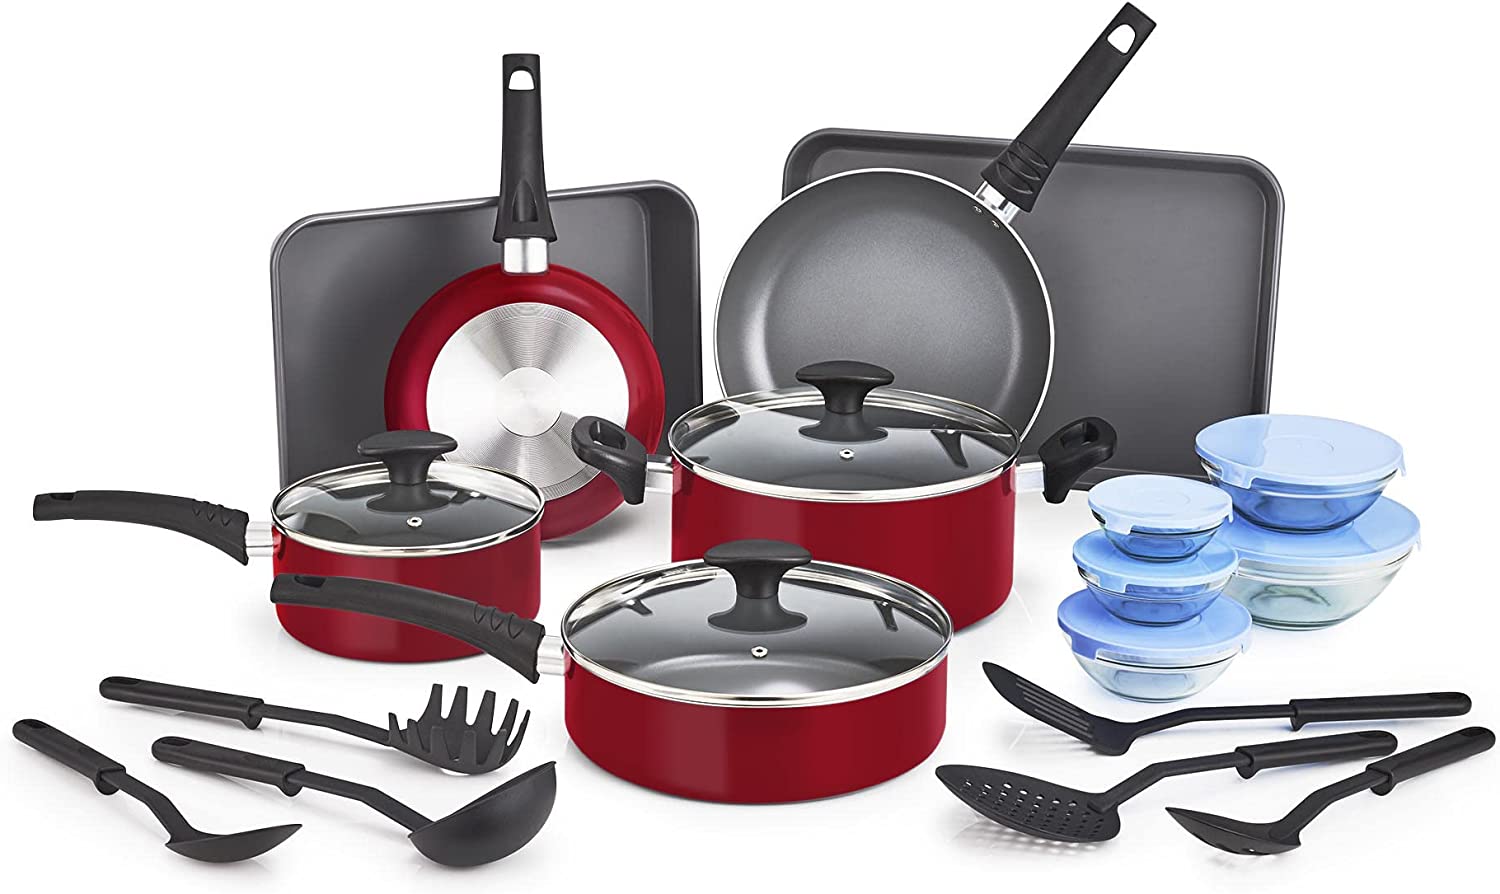 https://bigbigmart.com/wp-content/uploads/2023/06/BELLA-Nonstick-Cookware-Set-with-Glass-Lids-Aluminum-Bakeware-Pots-and-Pans-Storage-Bowls-Utensils-Compatible-with-All-Stovetops-21-Piece-Red.jpg